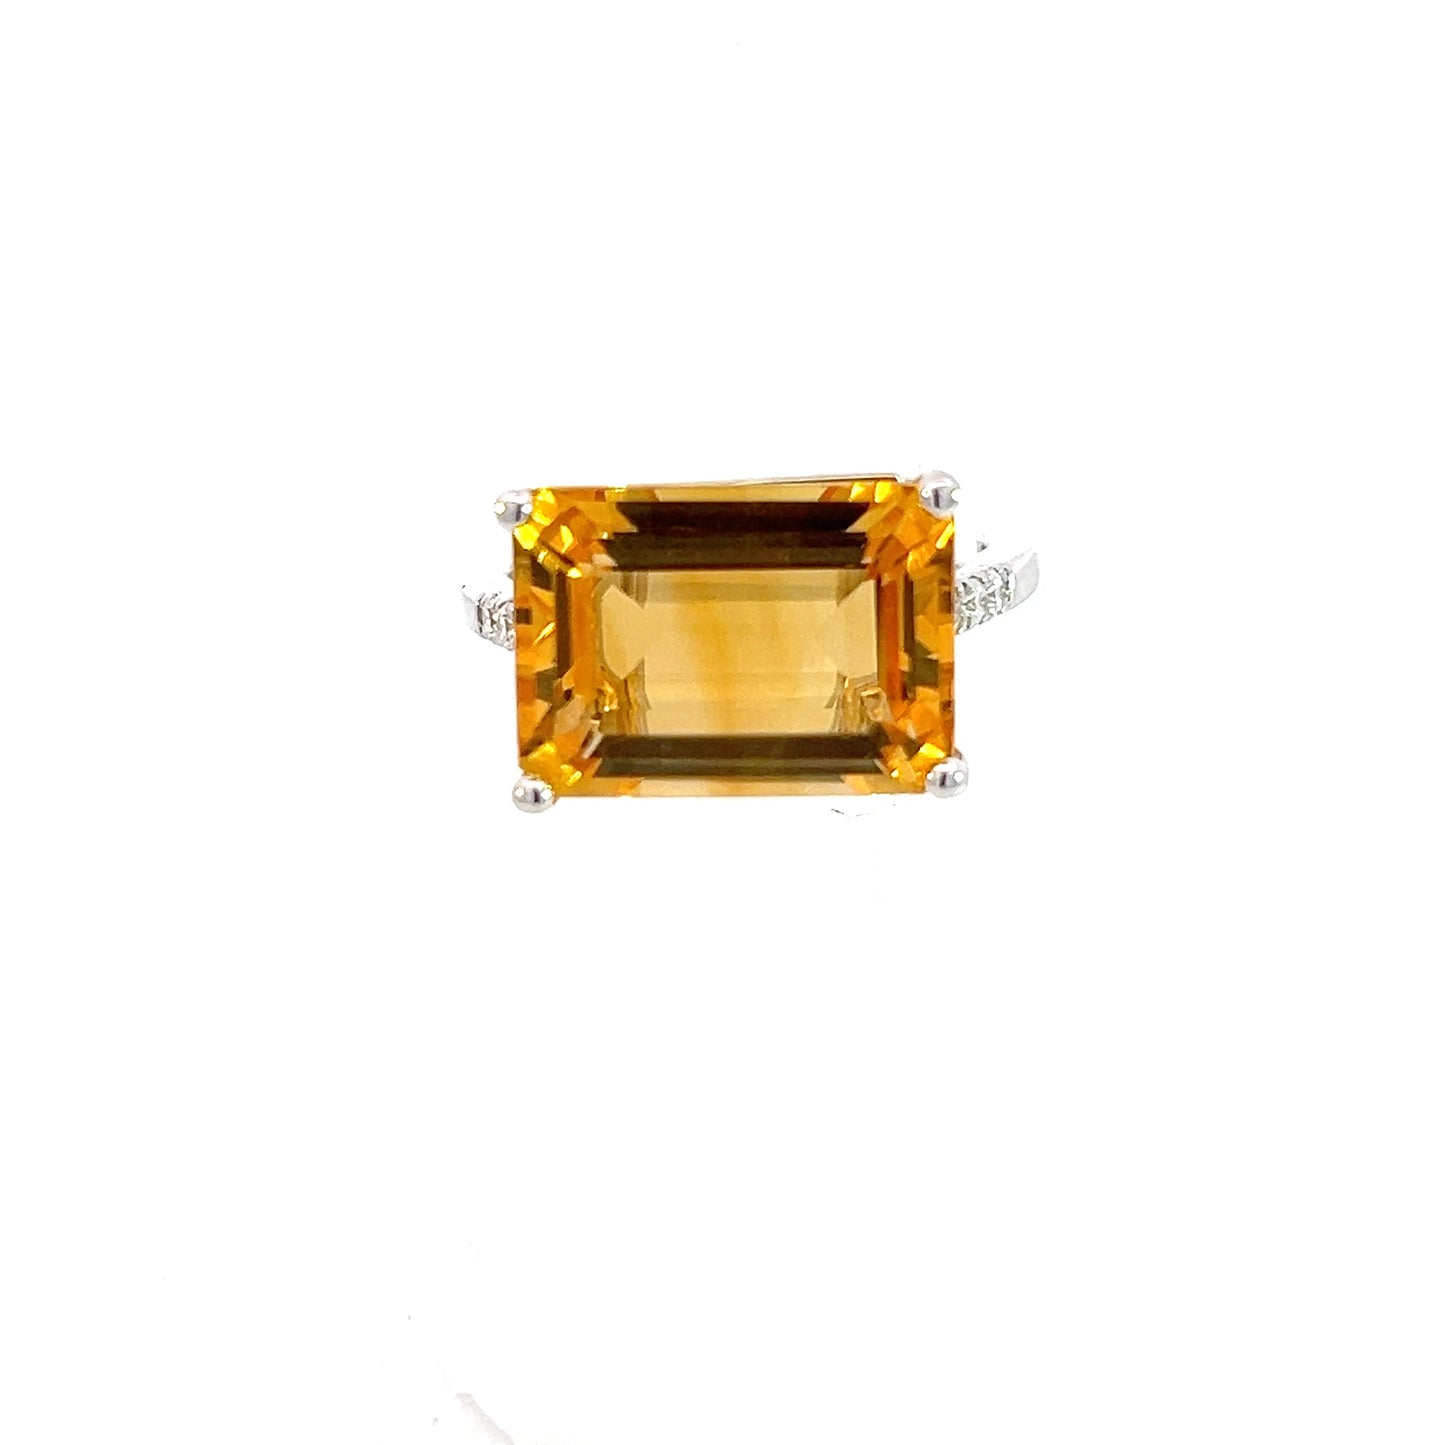 Natural Citrine Diamond Ring 6.5 14k W Gold 7.01 TCW Certified $3,950 310630